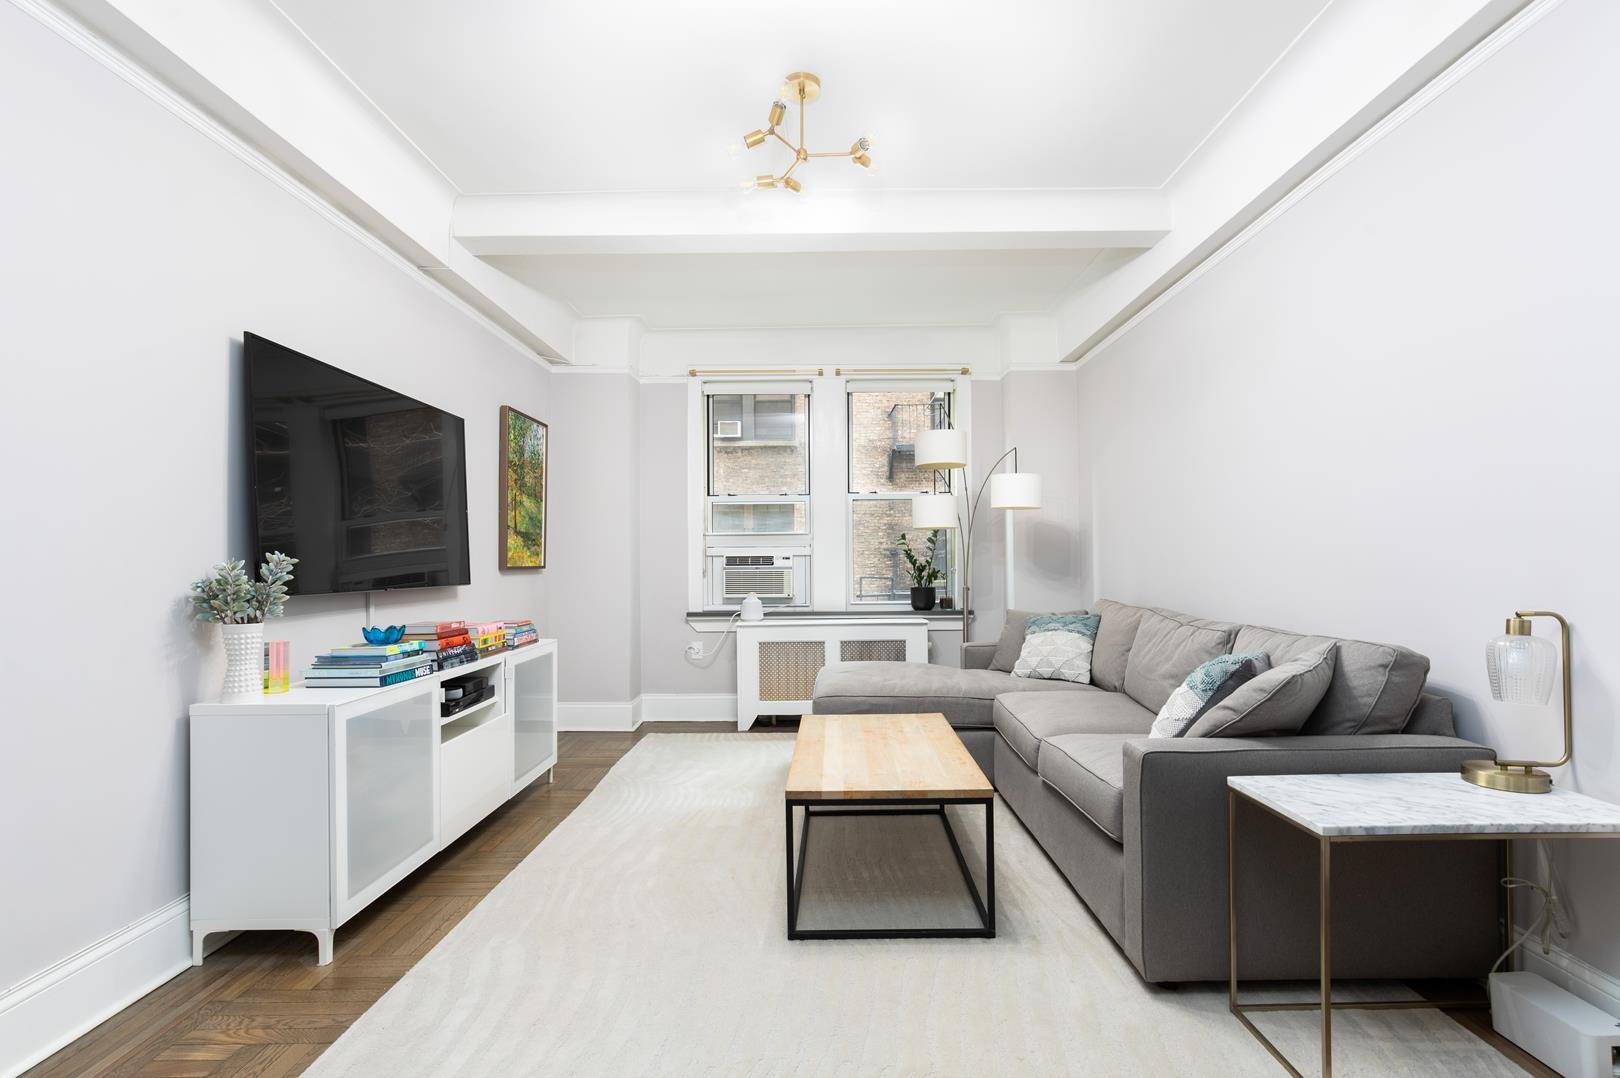 WELCOME HOME ! Apartment 2F at 315 West 86th Street a renovated unit with an open layout, conveniently located in a fantastic building in the heart of the Upper West ...